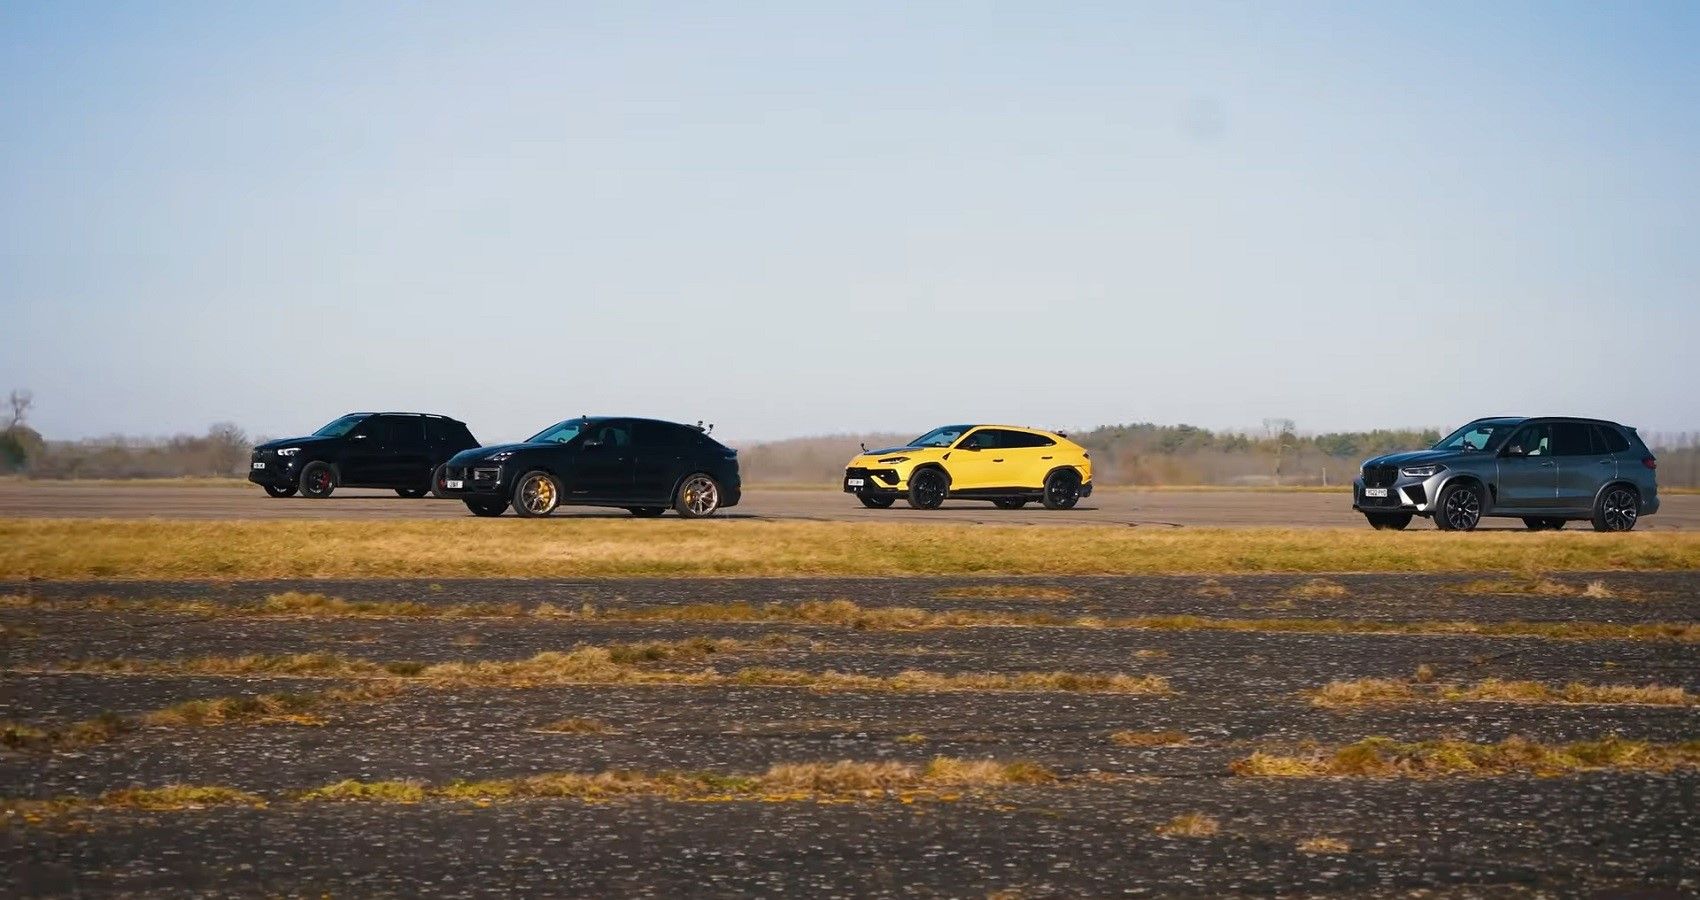 Fastest SUV drag race, SUVs in group accelerating towards camera on airfield